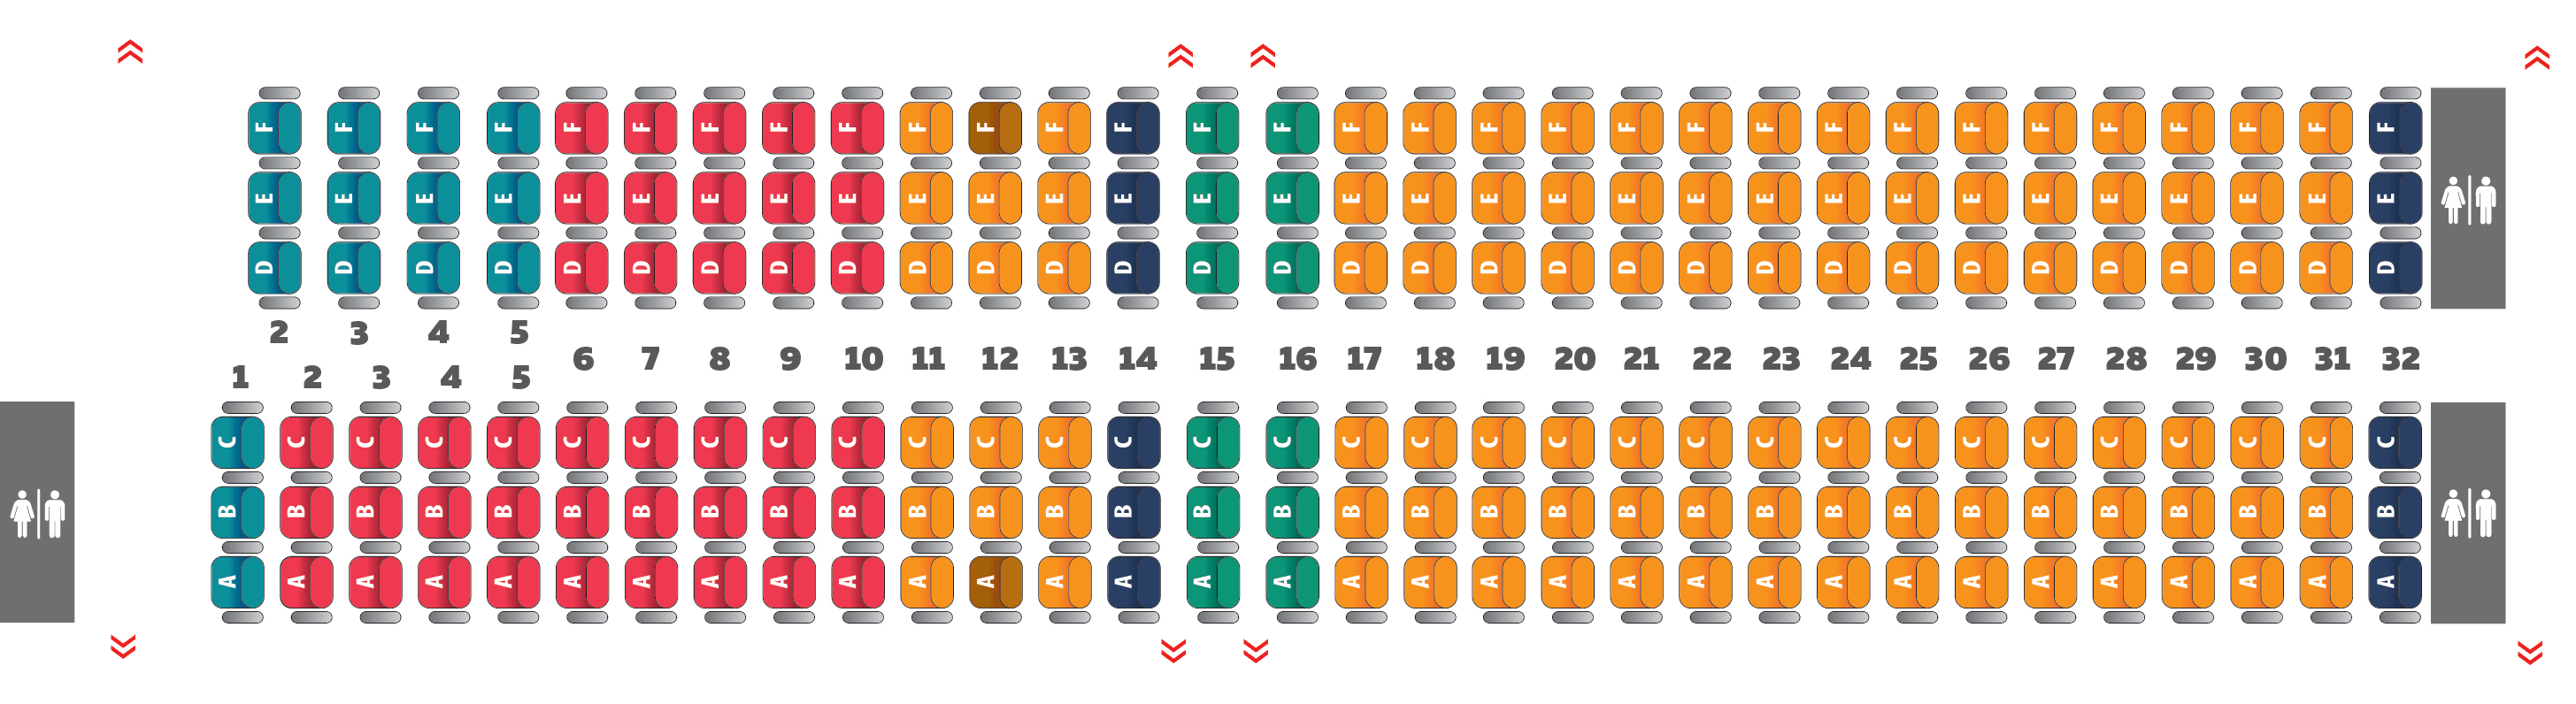 Seat Selection Sunwing Airlines Ca